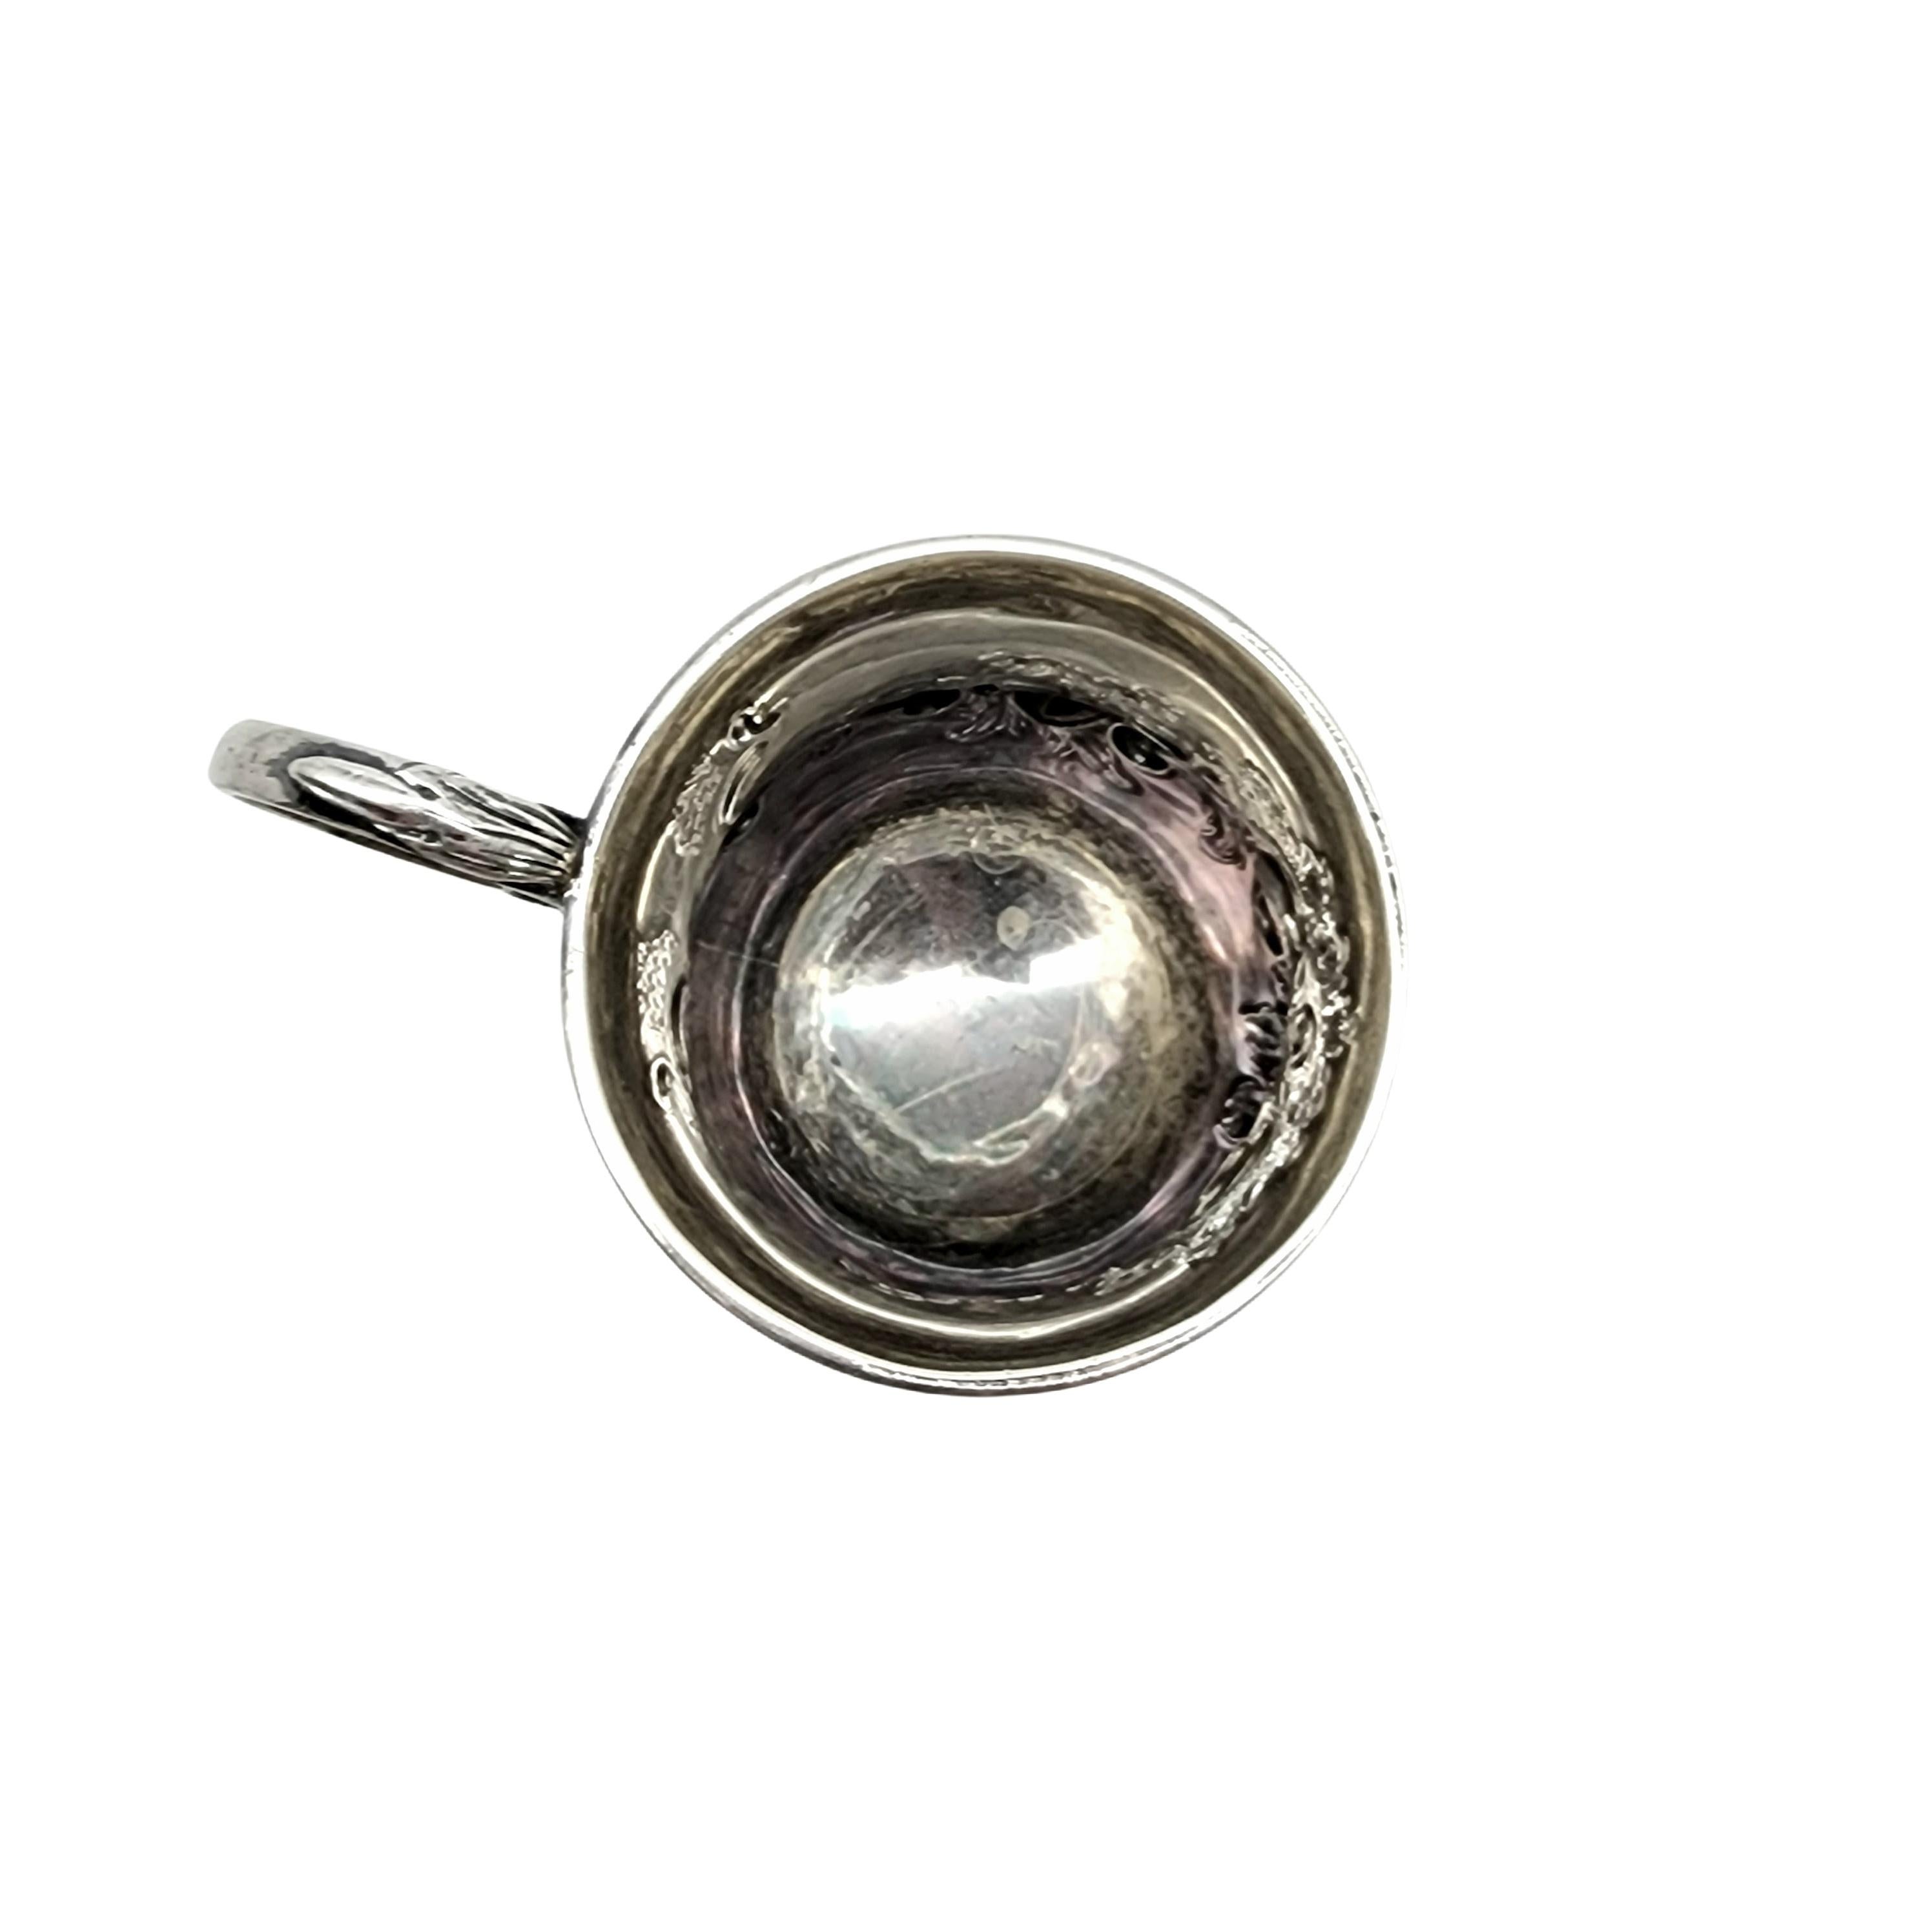 Antique George Angell London England Sterling Silver Footed Cup with Monogram For Sale 4